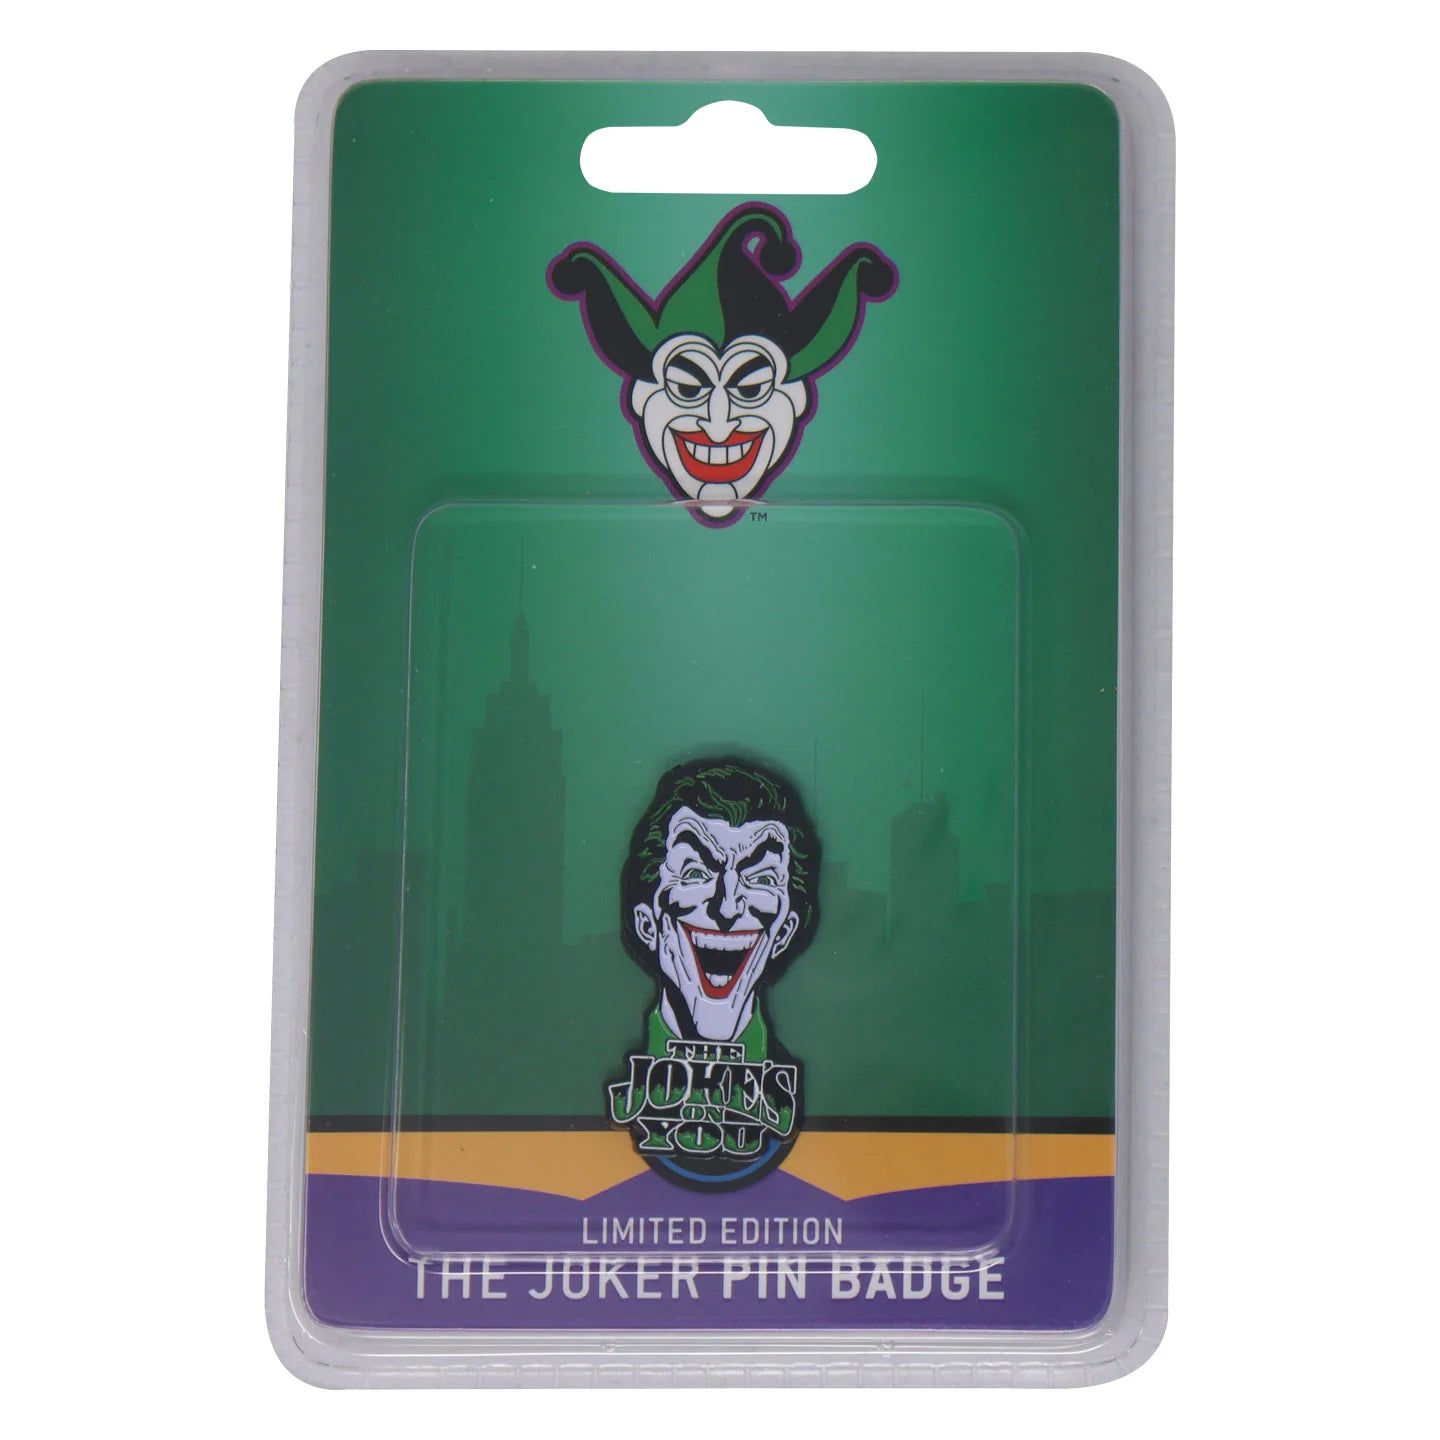 The Joker Limited Edition Pin Badge